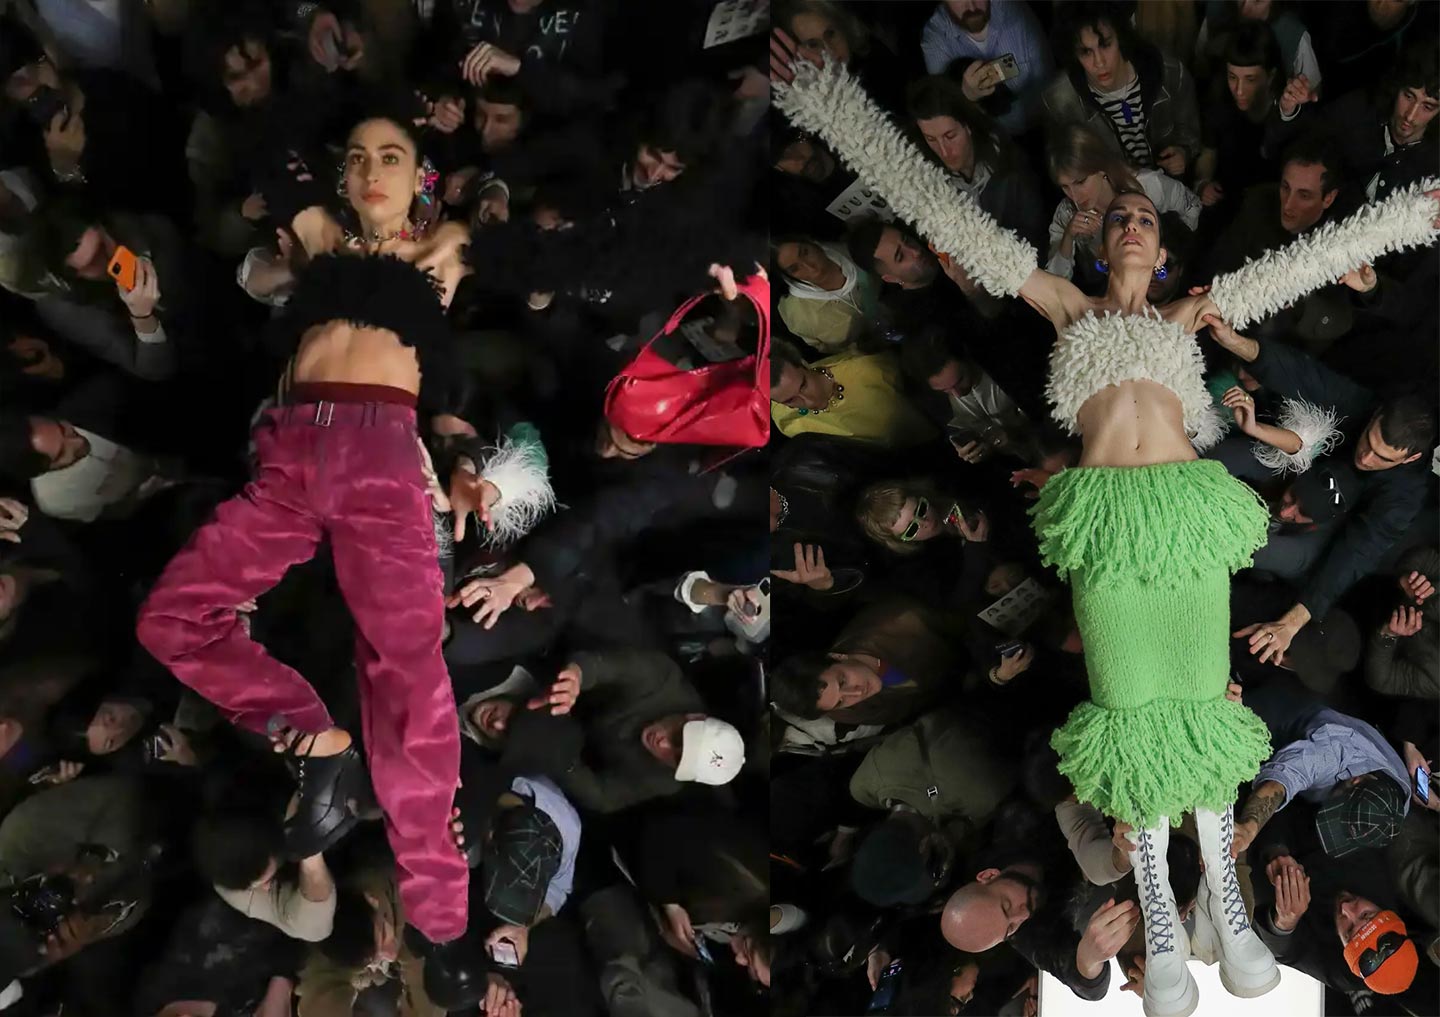 For Sunnei's FW23 collection, Simone Rizzo and Loris Messina asked models to crowd surf in the crowd of guests